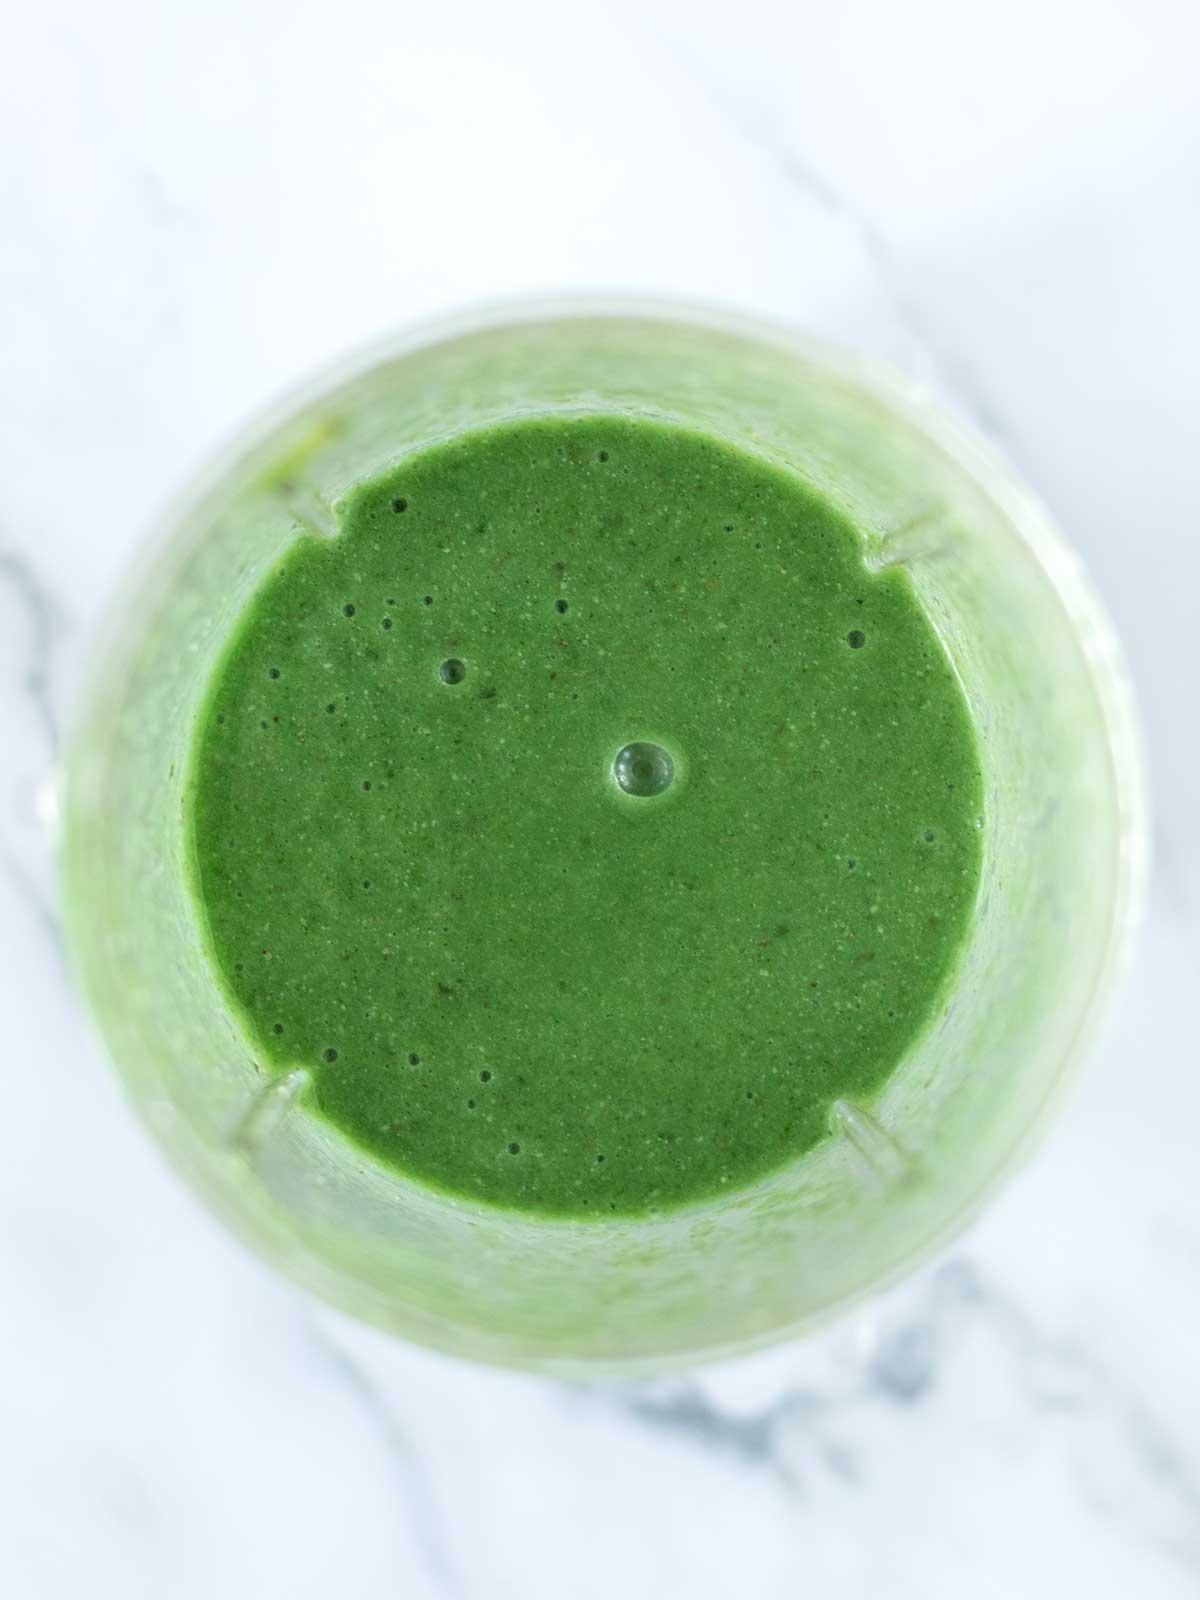 Creamy green detox smoothie with coconut water in a blender